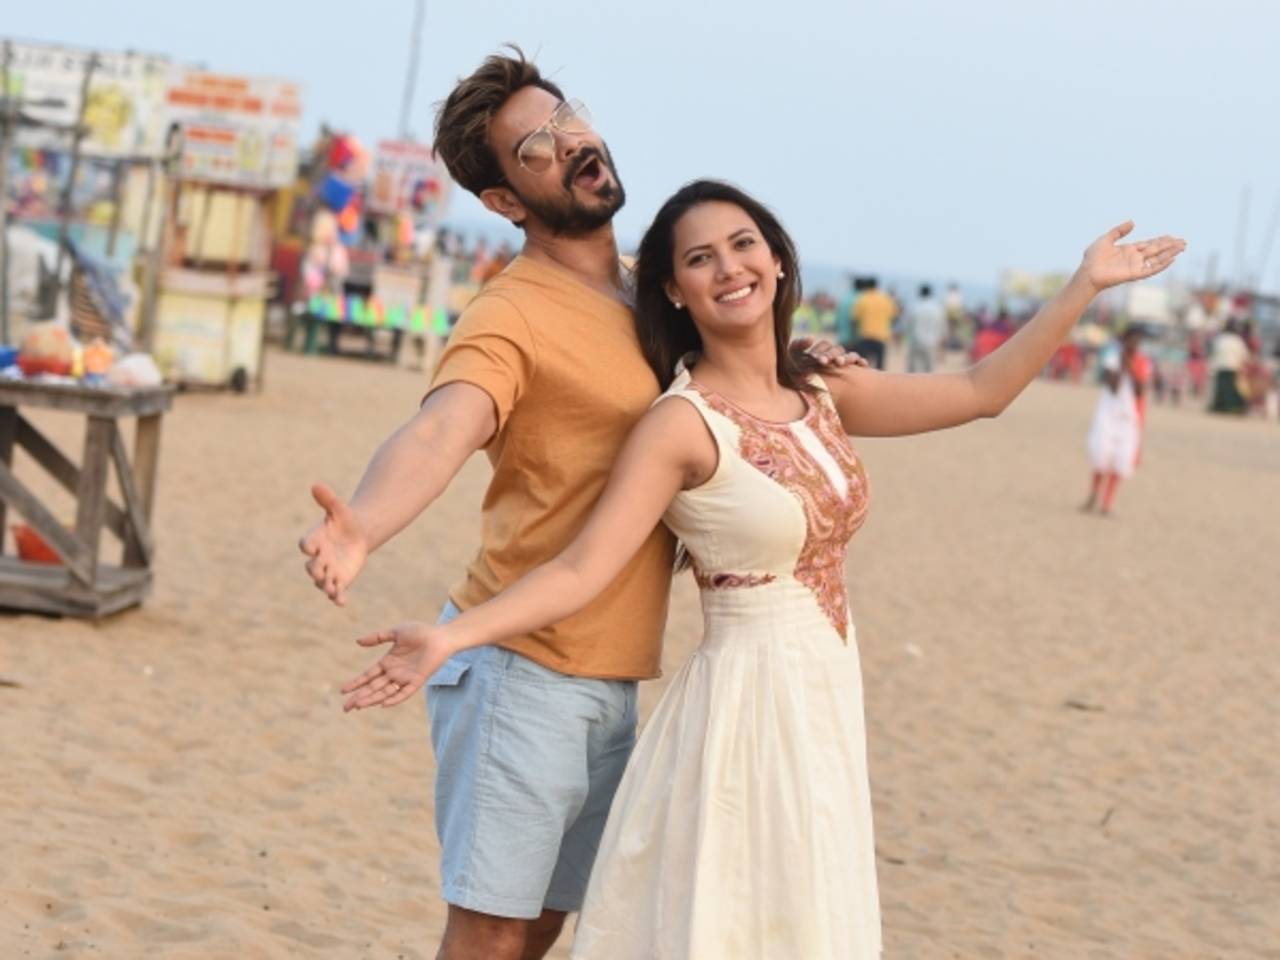 Chennai has the best beaches, even better than Goa Rochelle Rao Tamil Movie News picture image photo